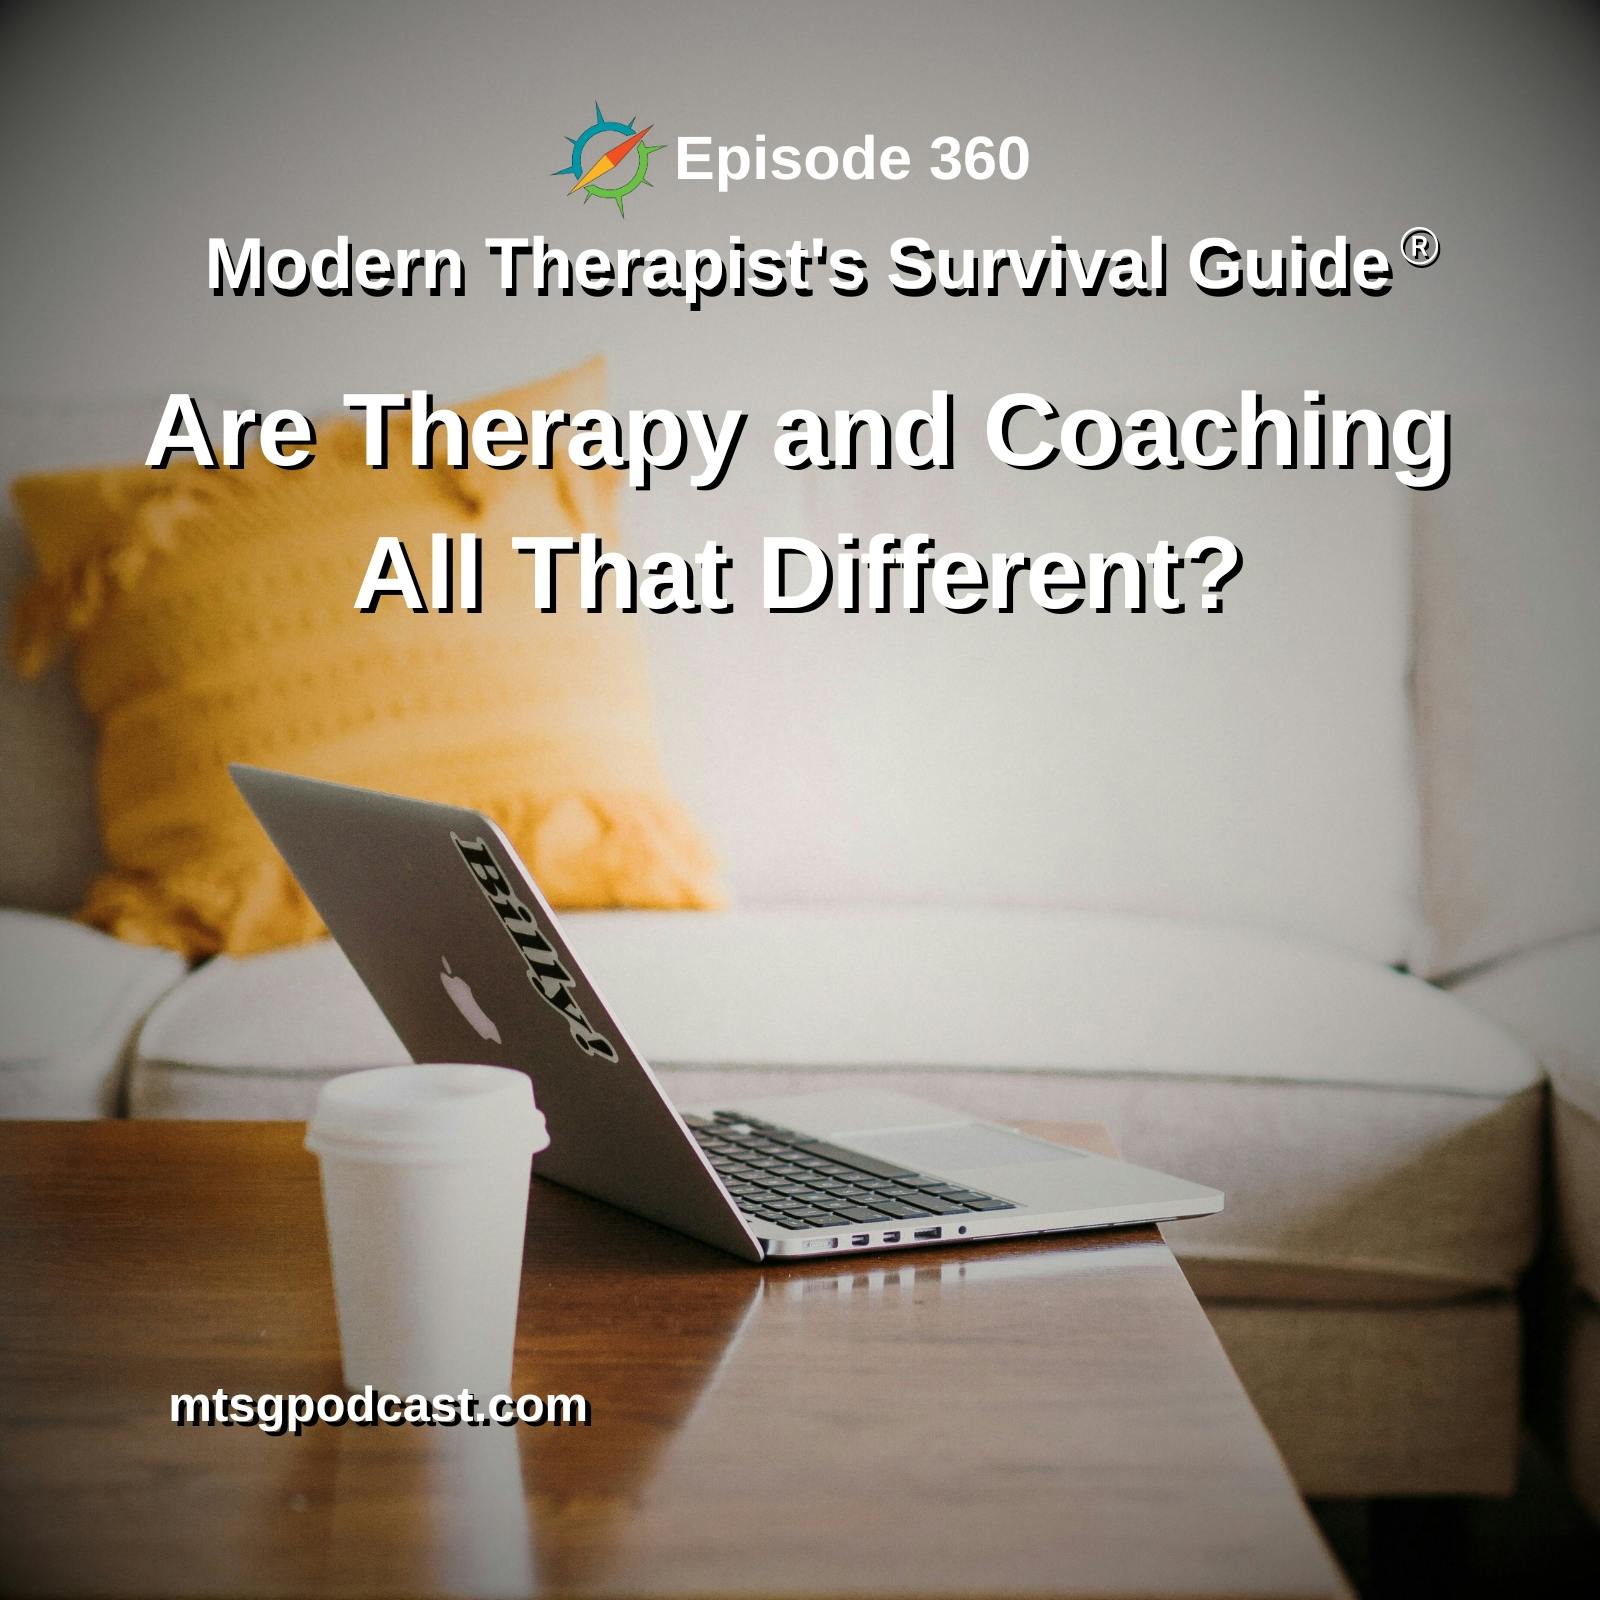 Are Therapy and Coaching All That Different?